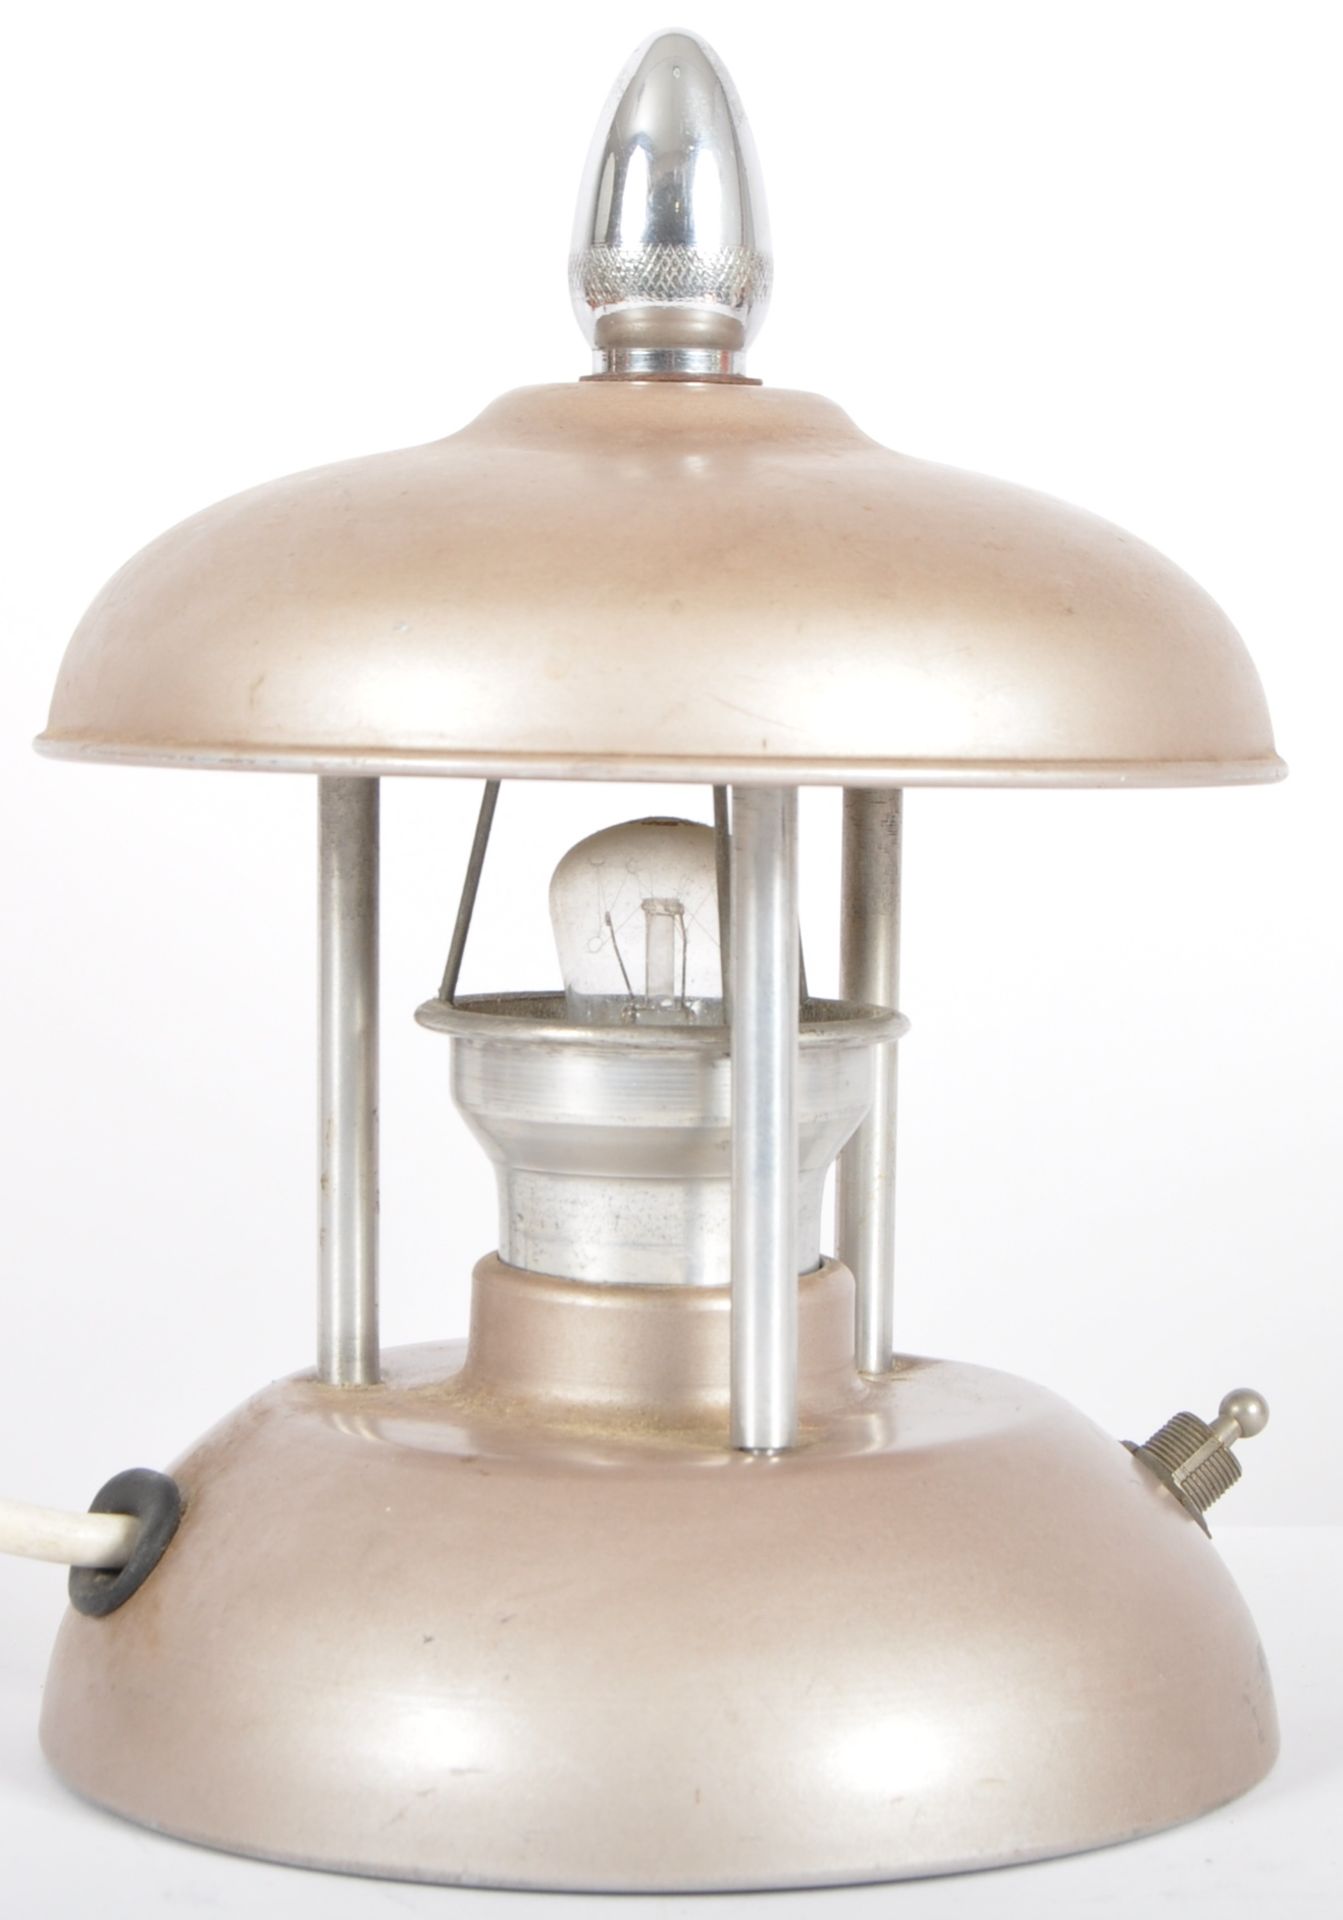 RETRO MID CENTURY 1950s TWIST RISE AND FALL TABLE LAMP - Image 3 of 7